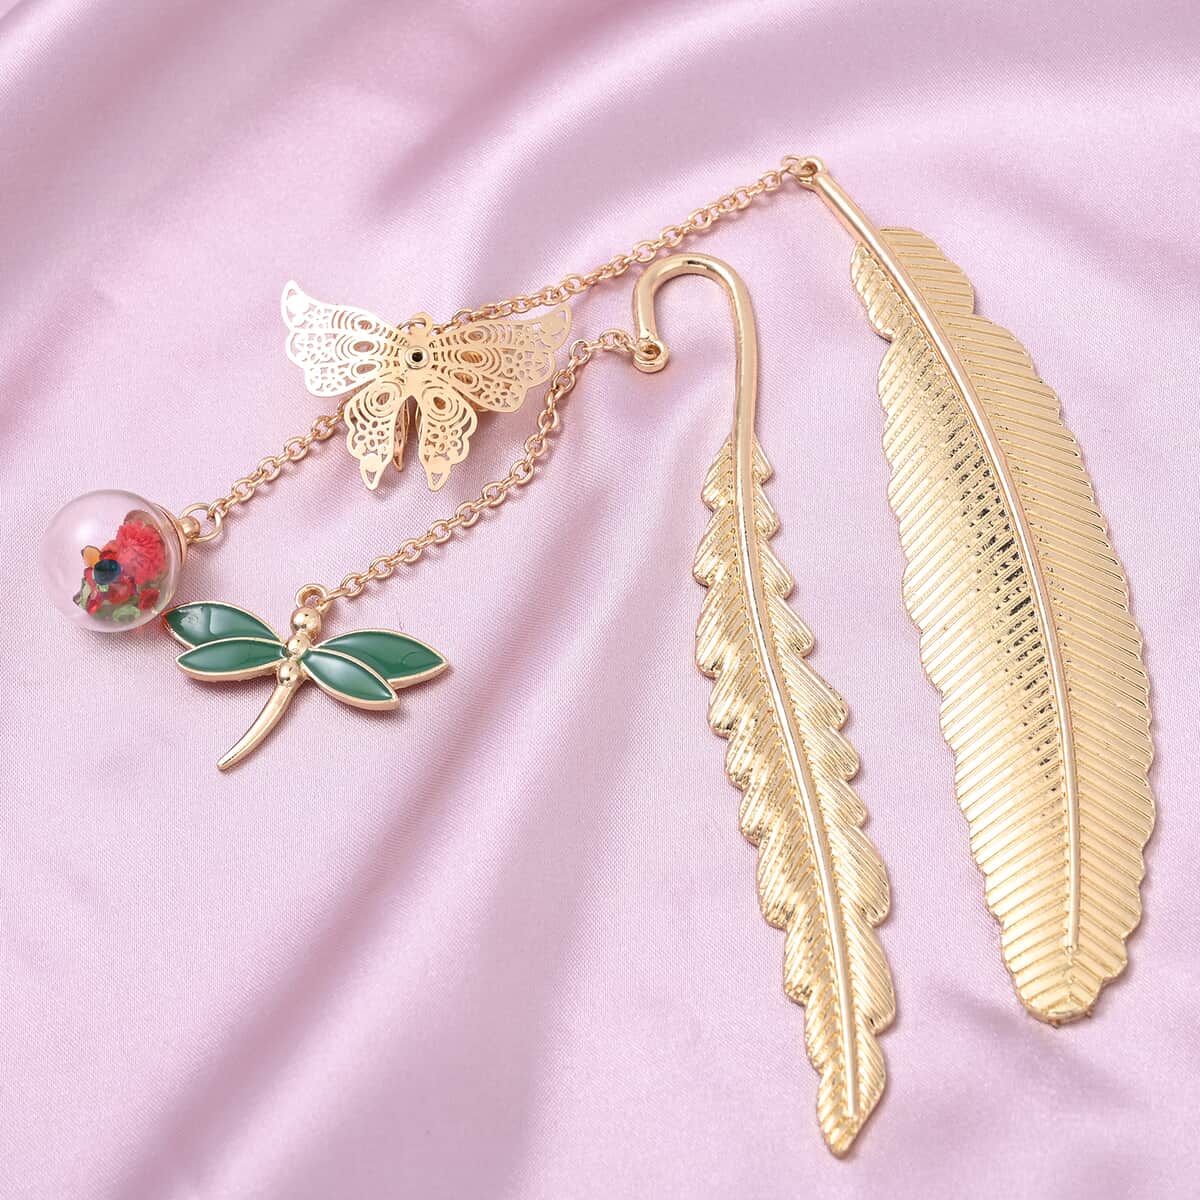 Set of 2 Multi Austrian Crystal and Enameled Metallic Feather Bookmarks in Goldtone with Dragonfly Charm, Butterfly and Dried Pressed Flower image number 1